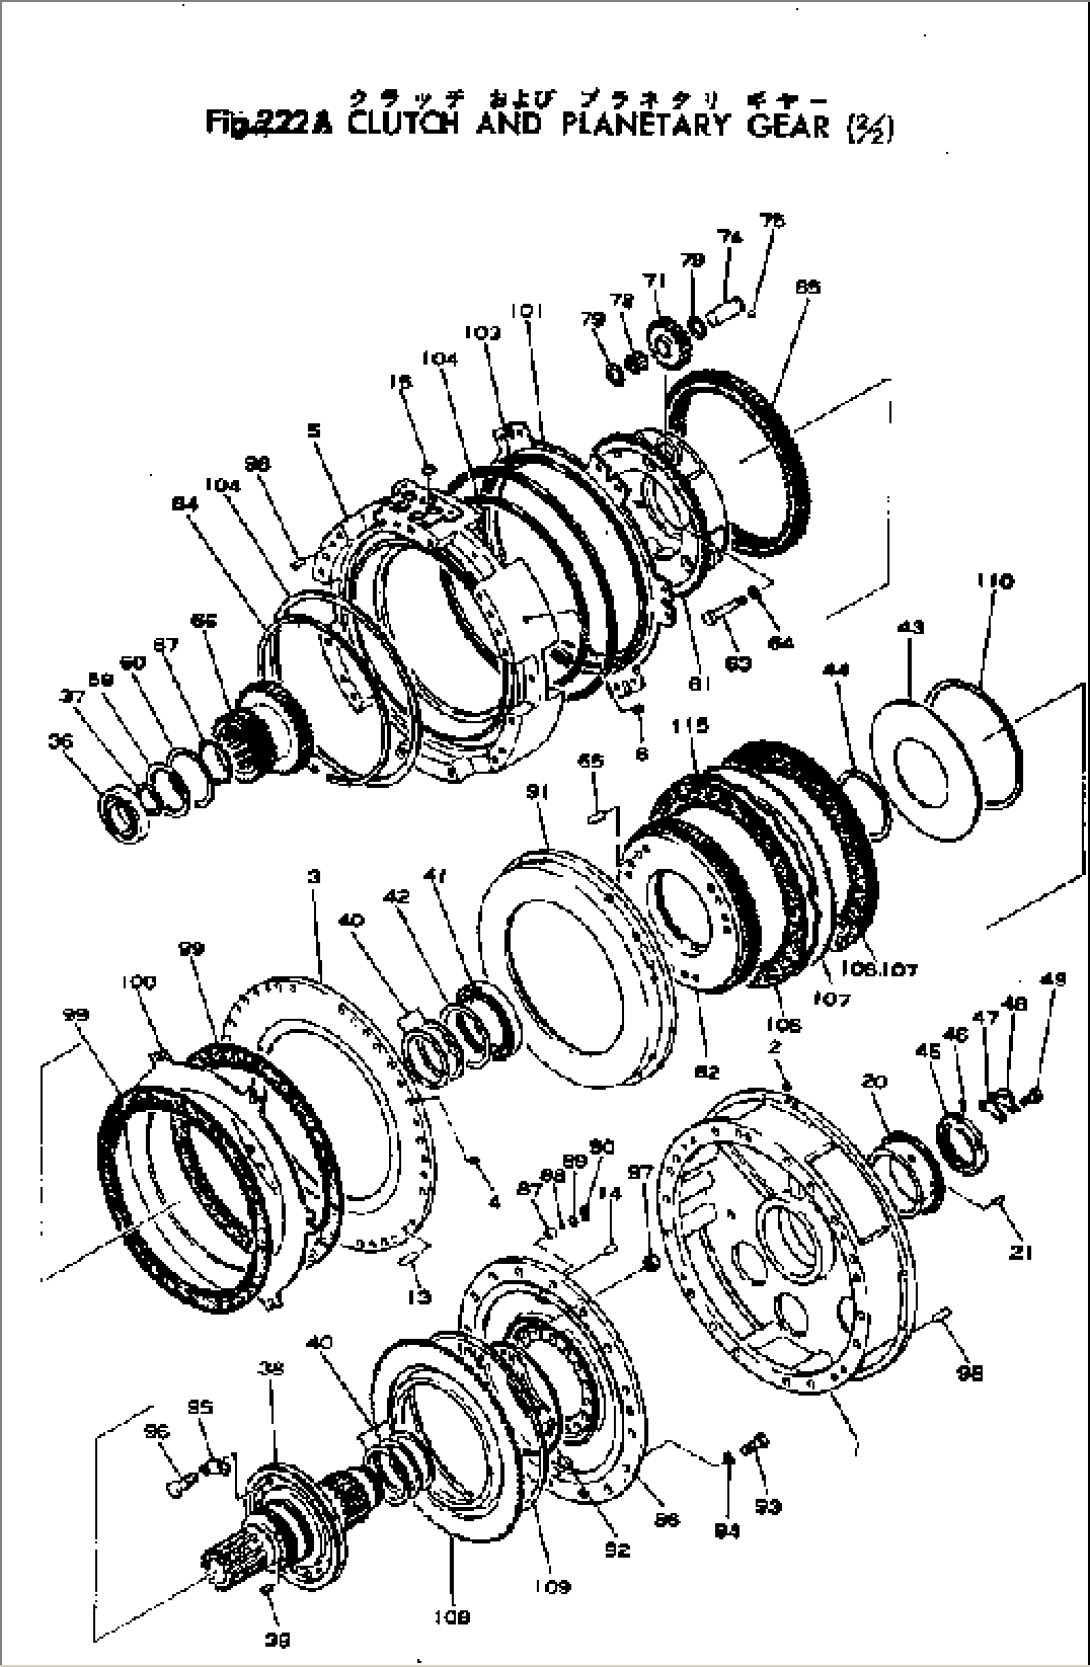 CLUTCH AND PLANETARY GEAR (1/2)